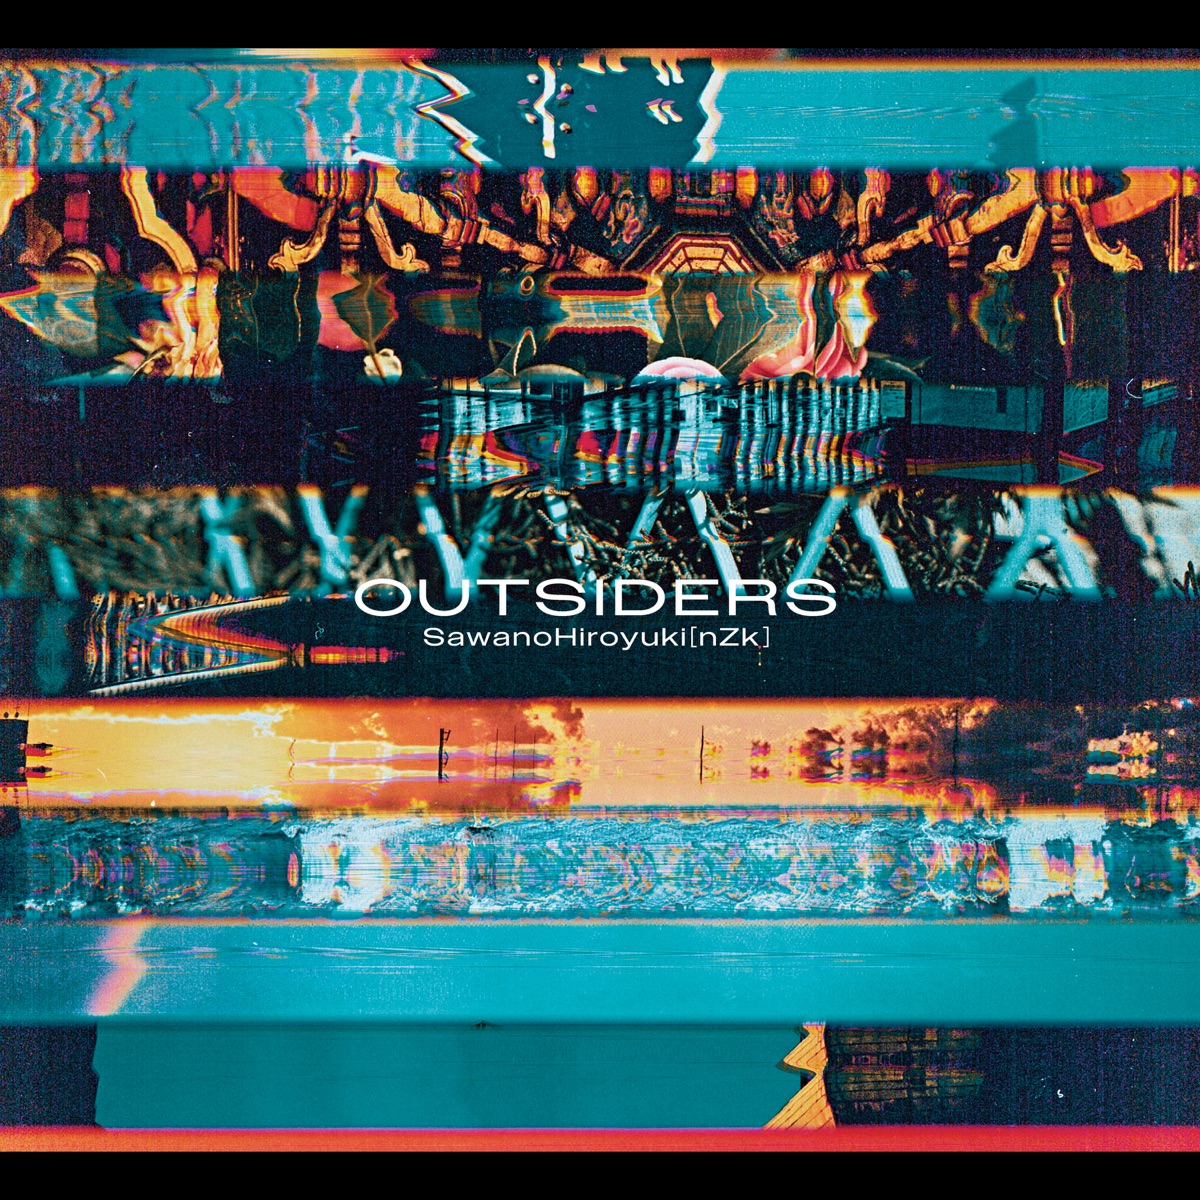 Cover art for『SawanoHiroyuki[nZk]:Laco - Roads to Ride ＜LCv＞』from the release『OUTSIDERS』